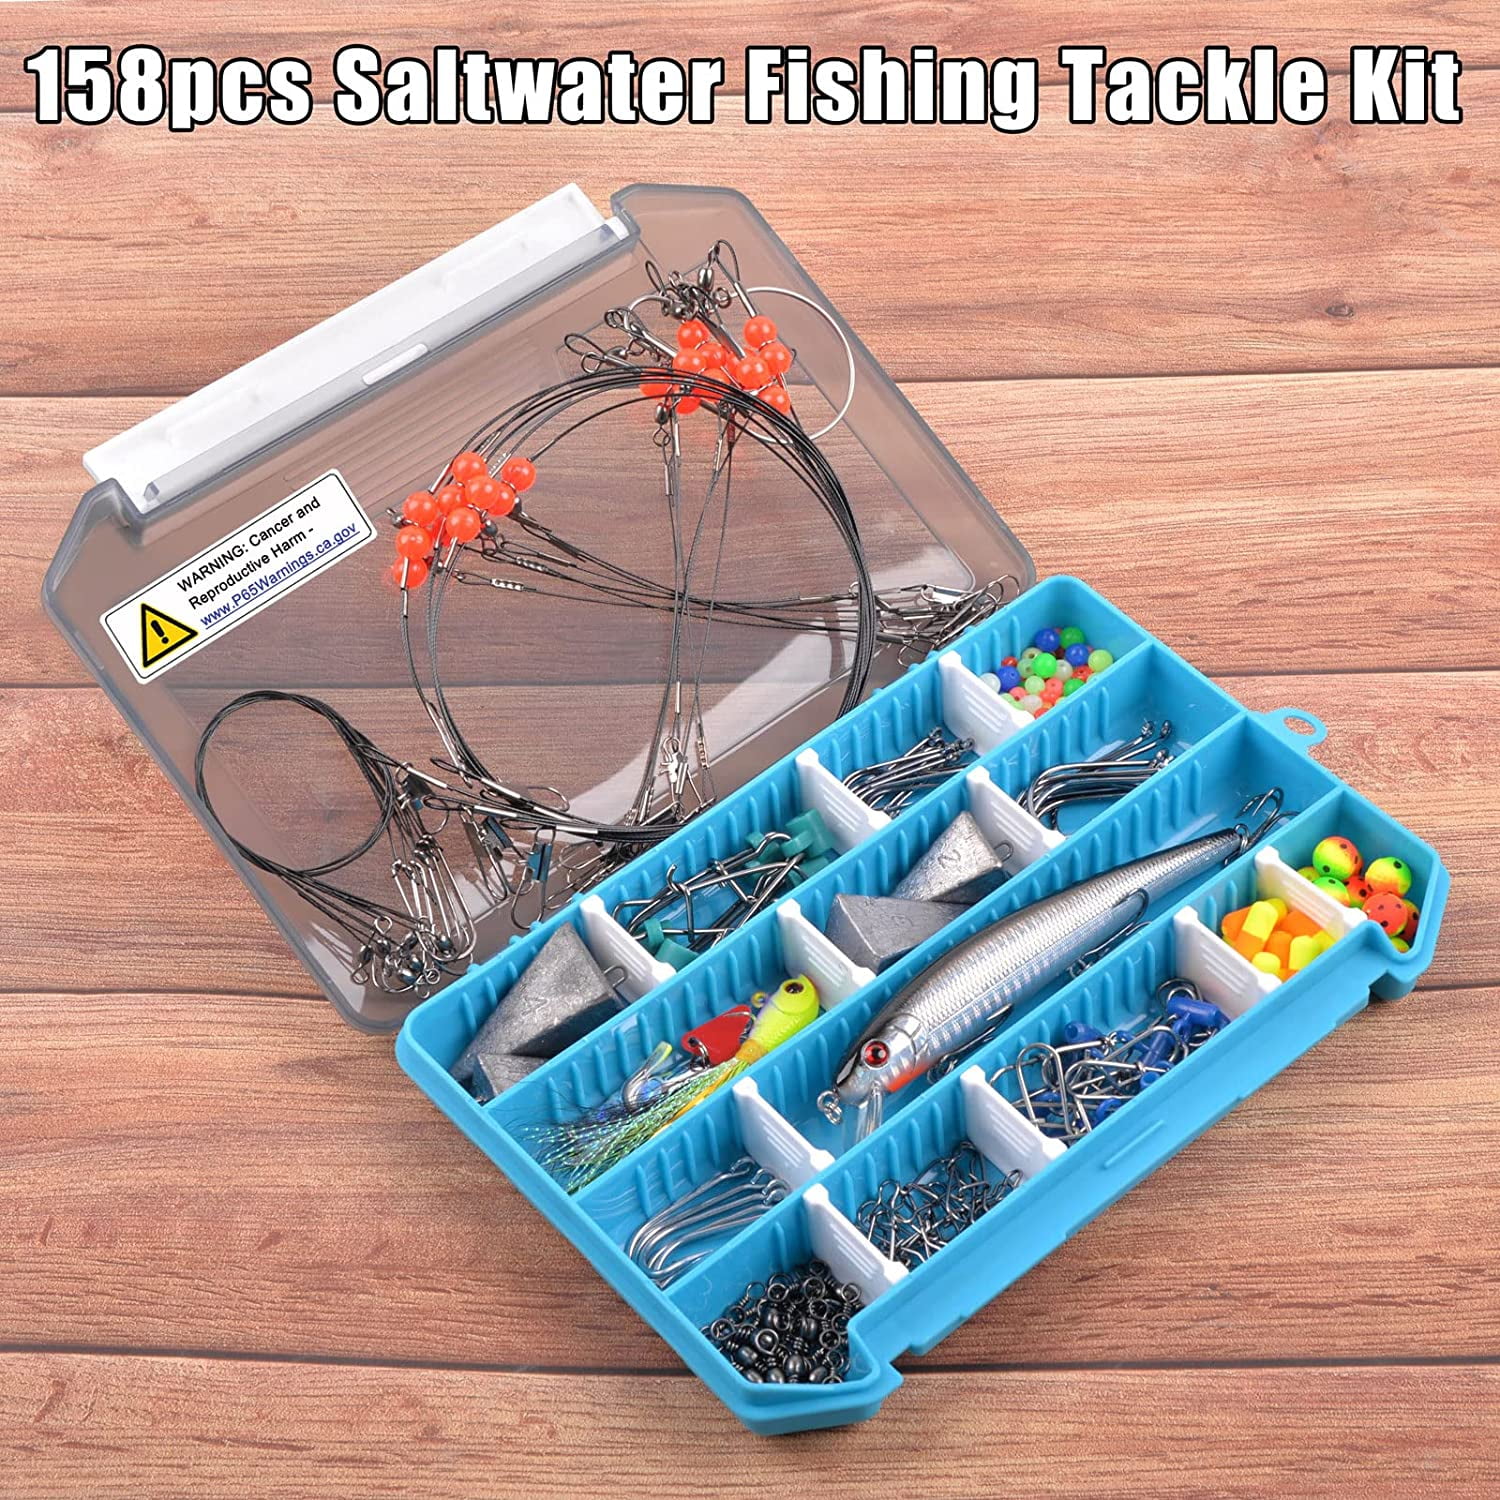  SILANON Surf Fishing Tackle Kit,Saltwater Fishing Gear Surf  Fishing Rigs Pyramid Weights Sinker Slide Foam Floats Leaders Various  Accessories Ocean Beach Fishing Equipment Box : ספורט ופעילות בחיק הטבע